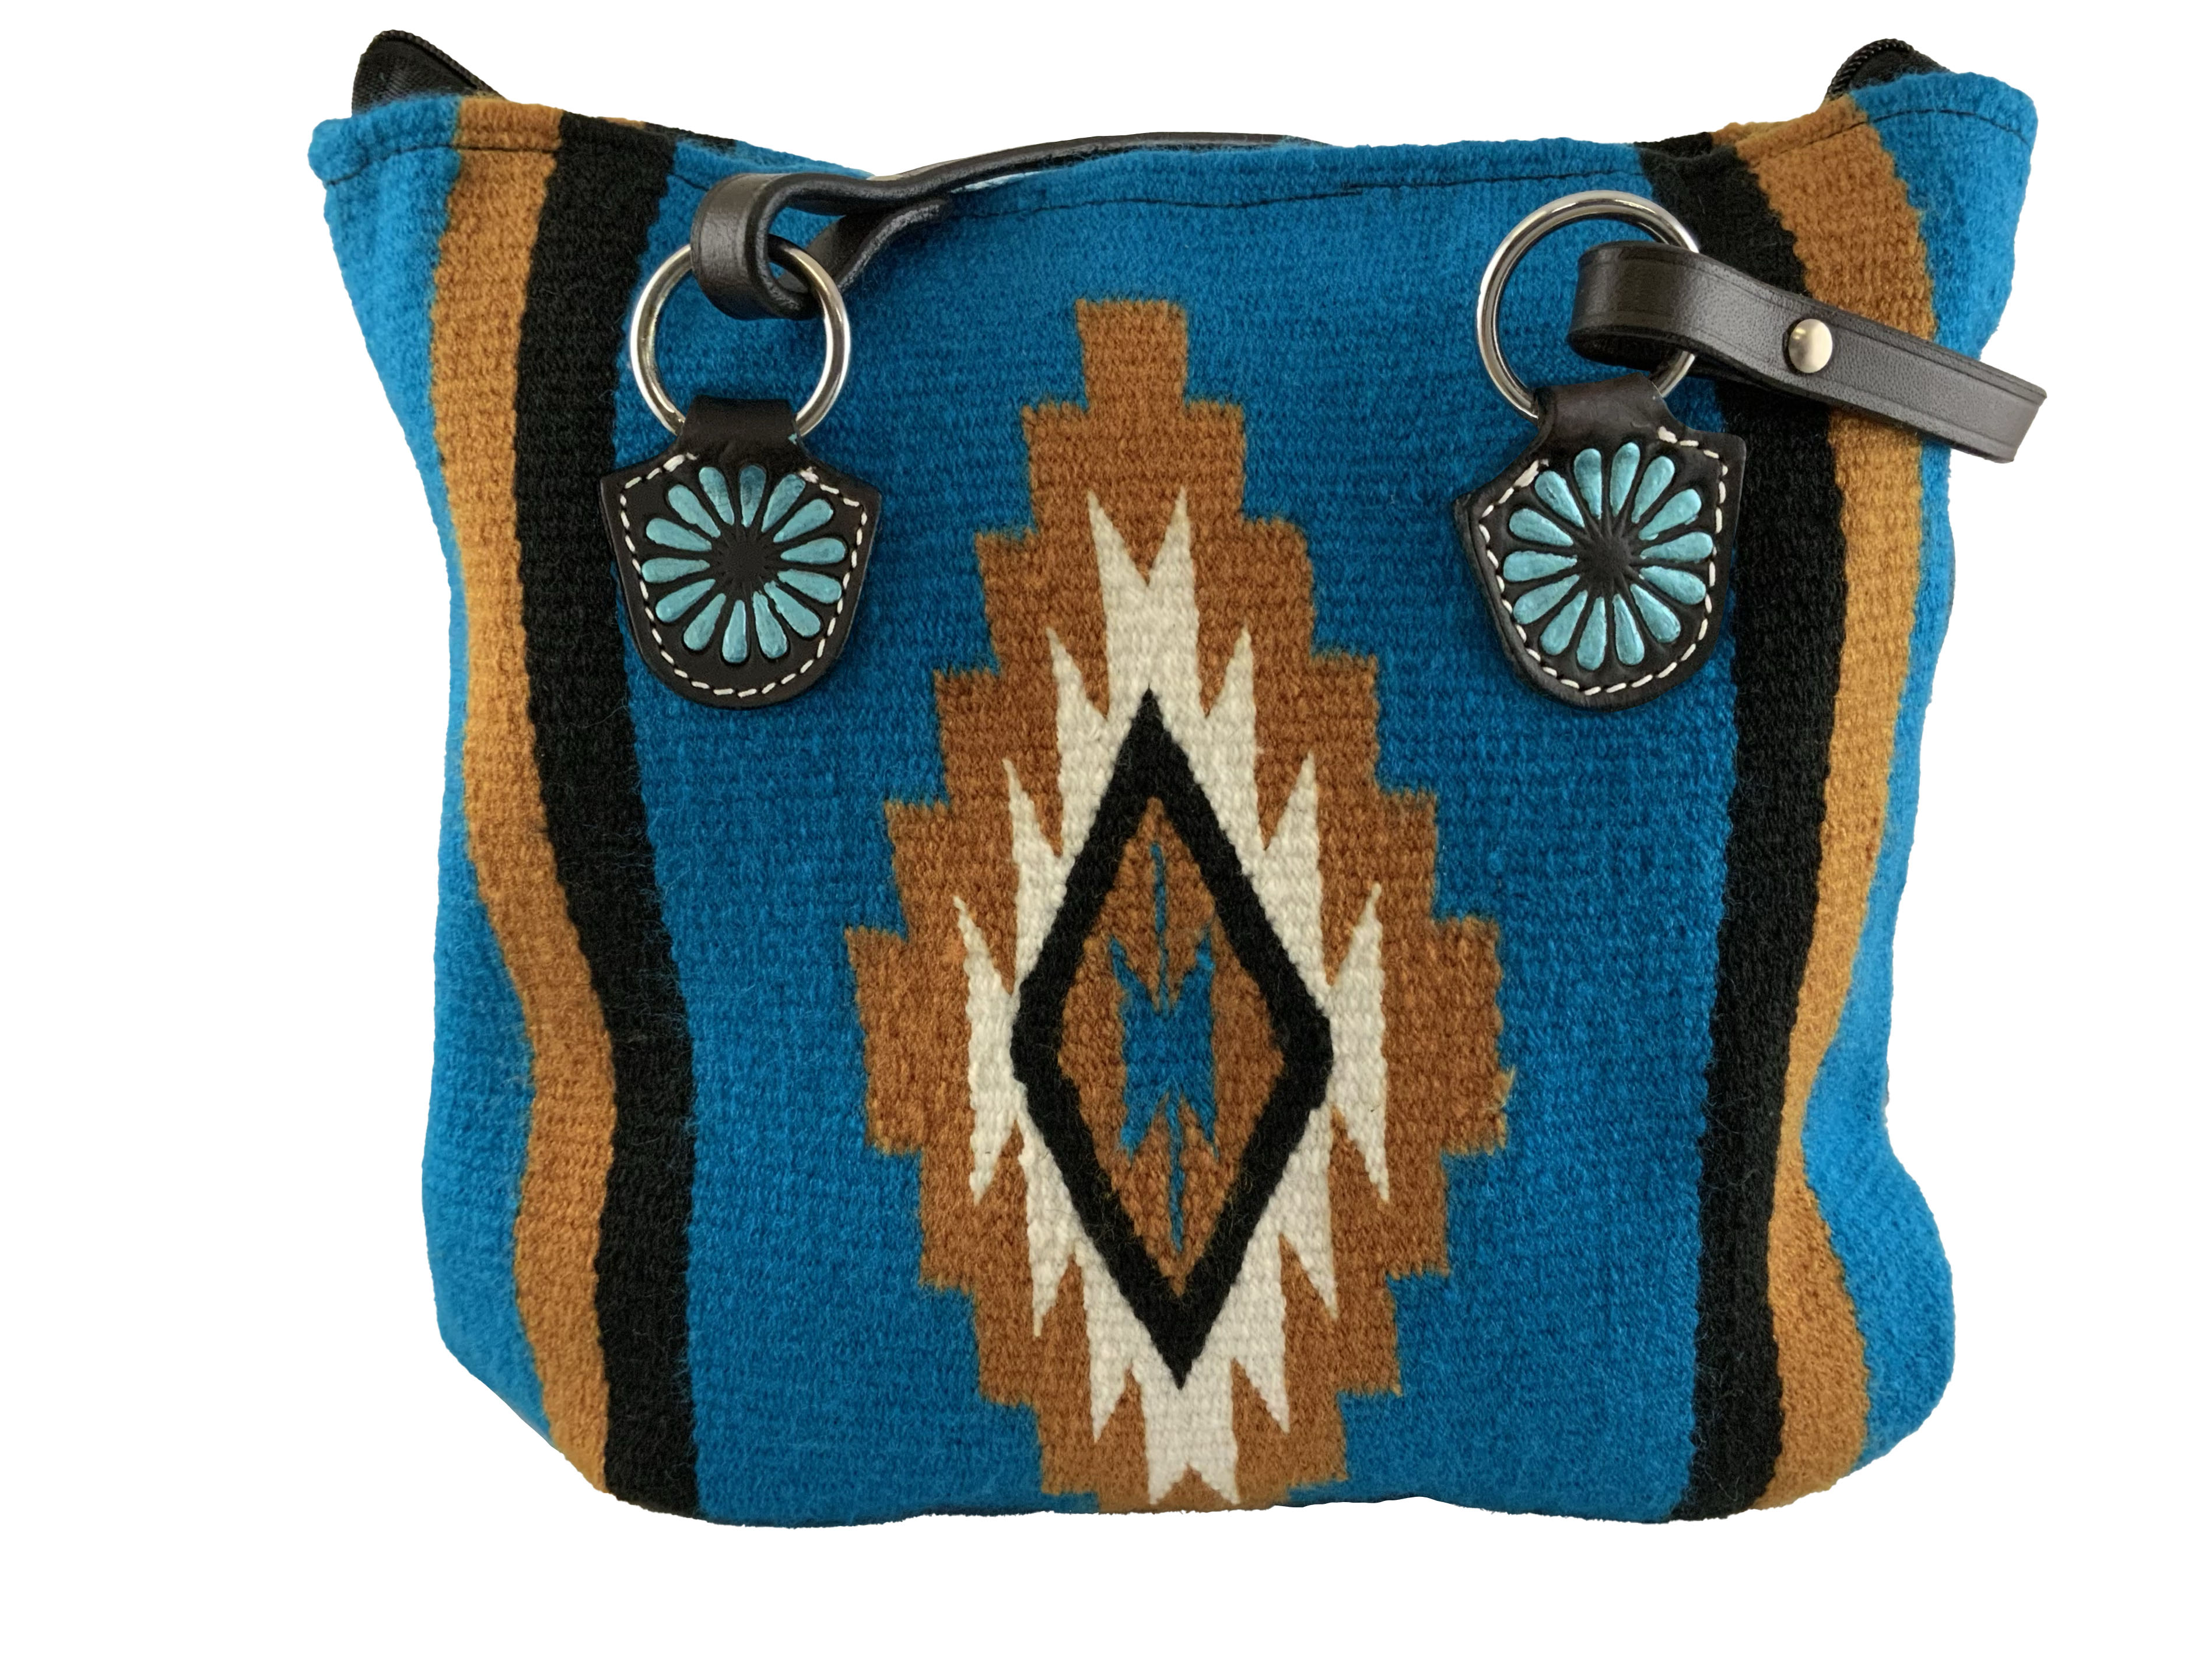 Showman Southwest Saddle blanket handbag with genuine leather handle with painted concho accents